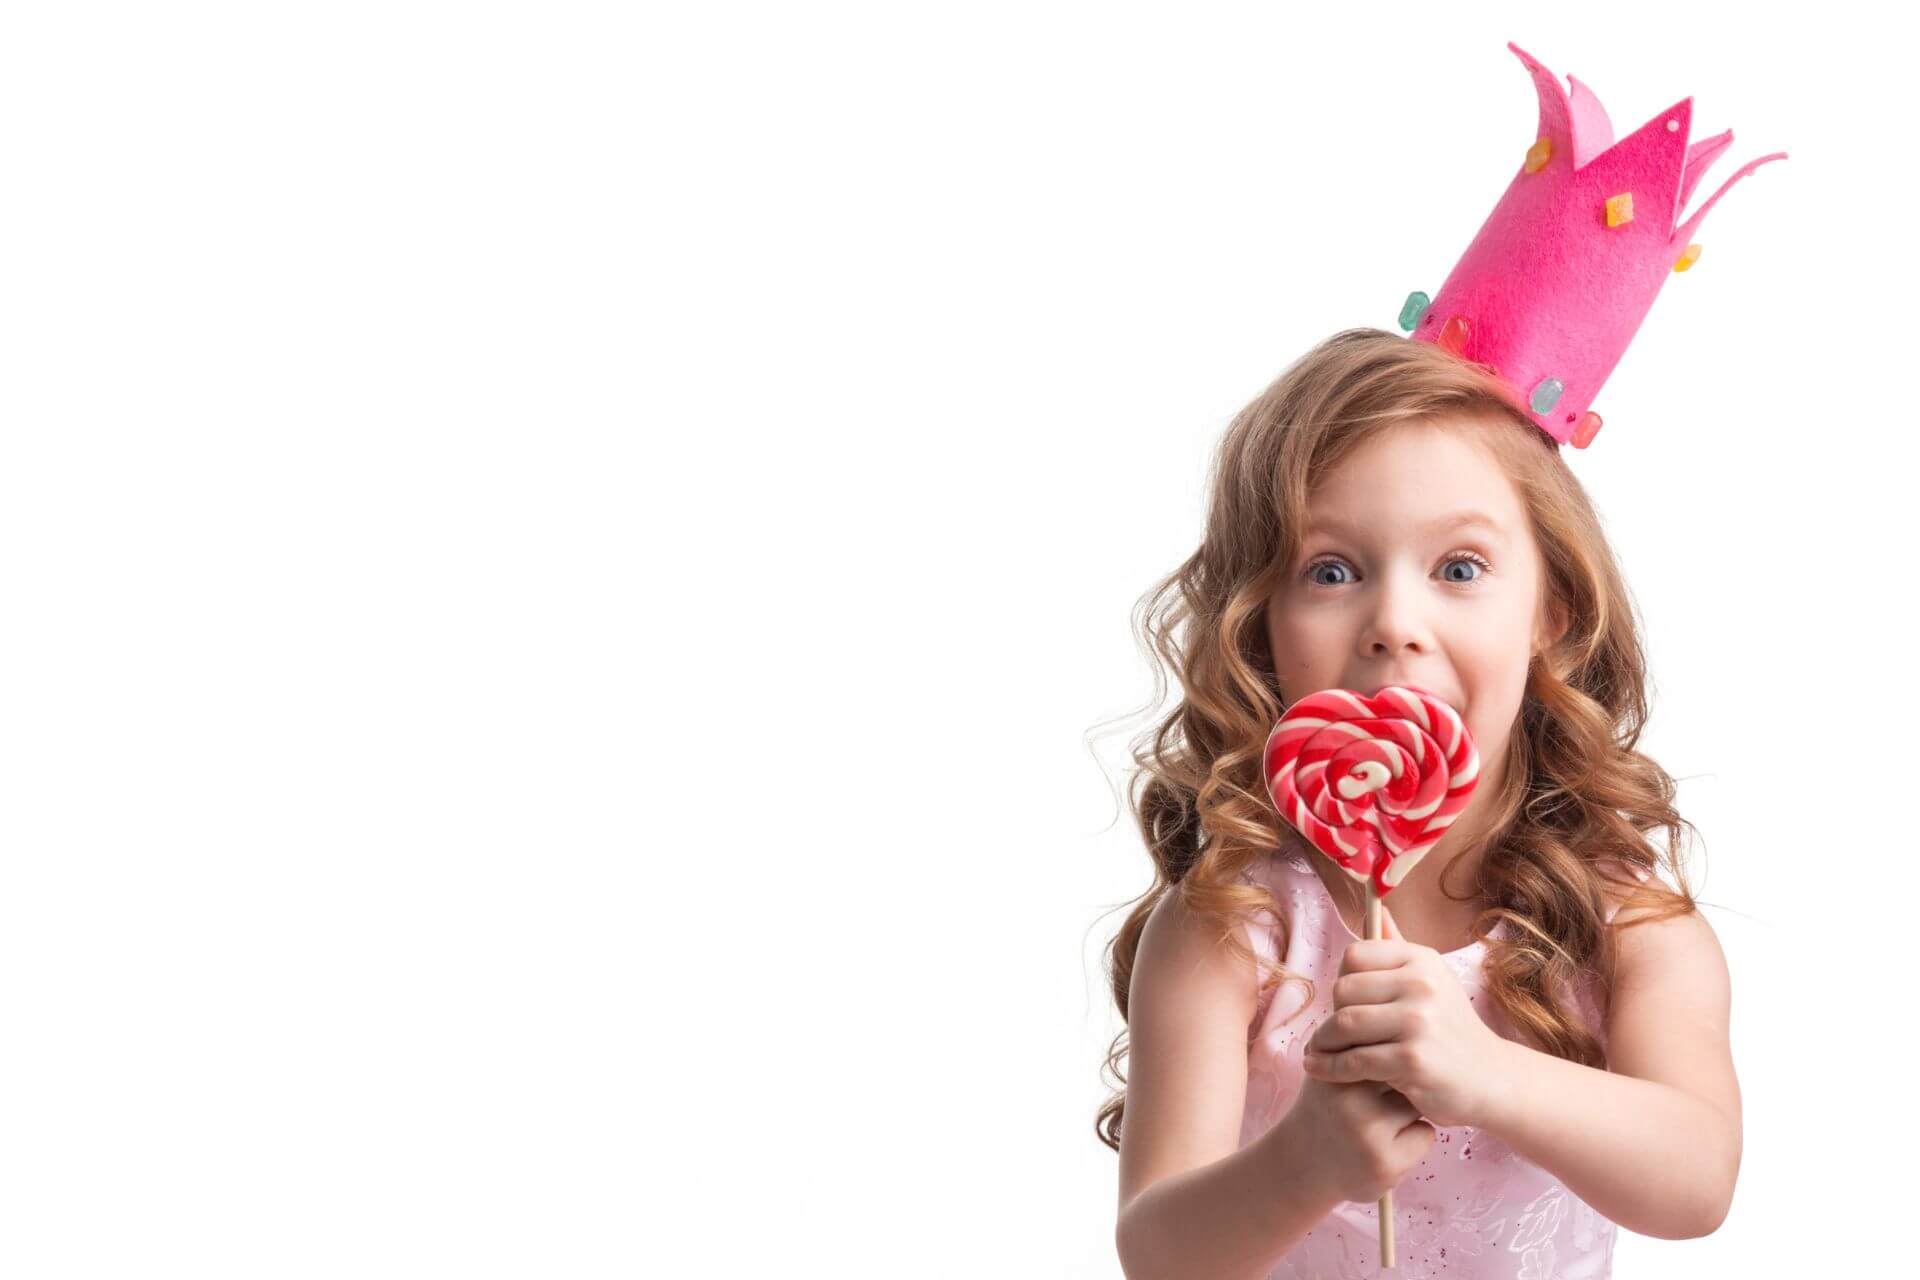 Why Do Kids Love Eating Sweets?